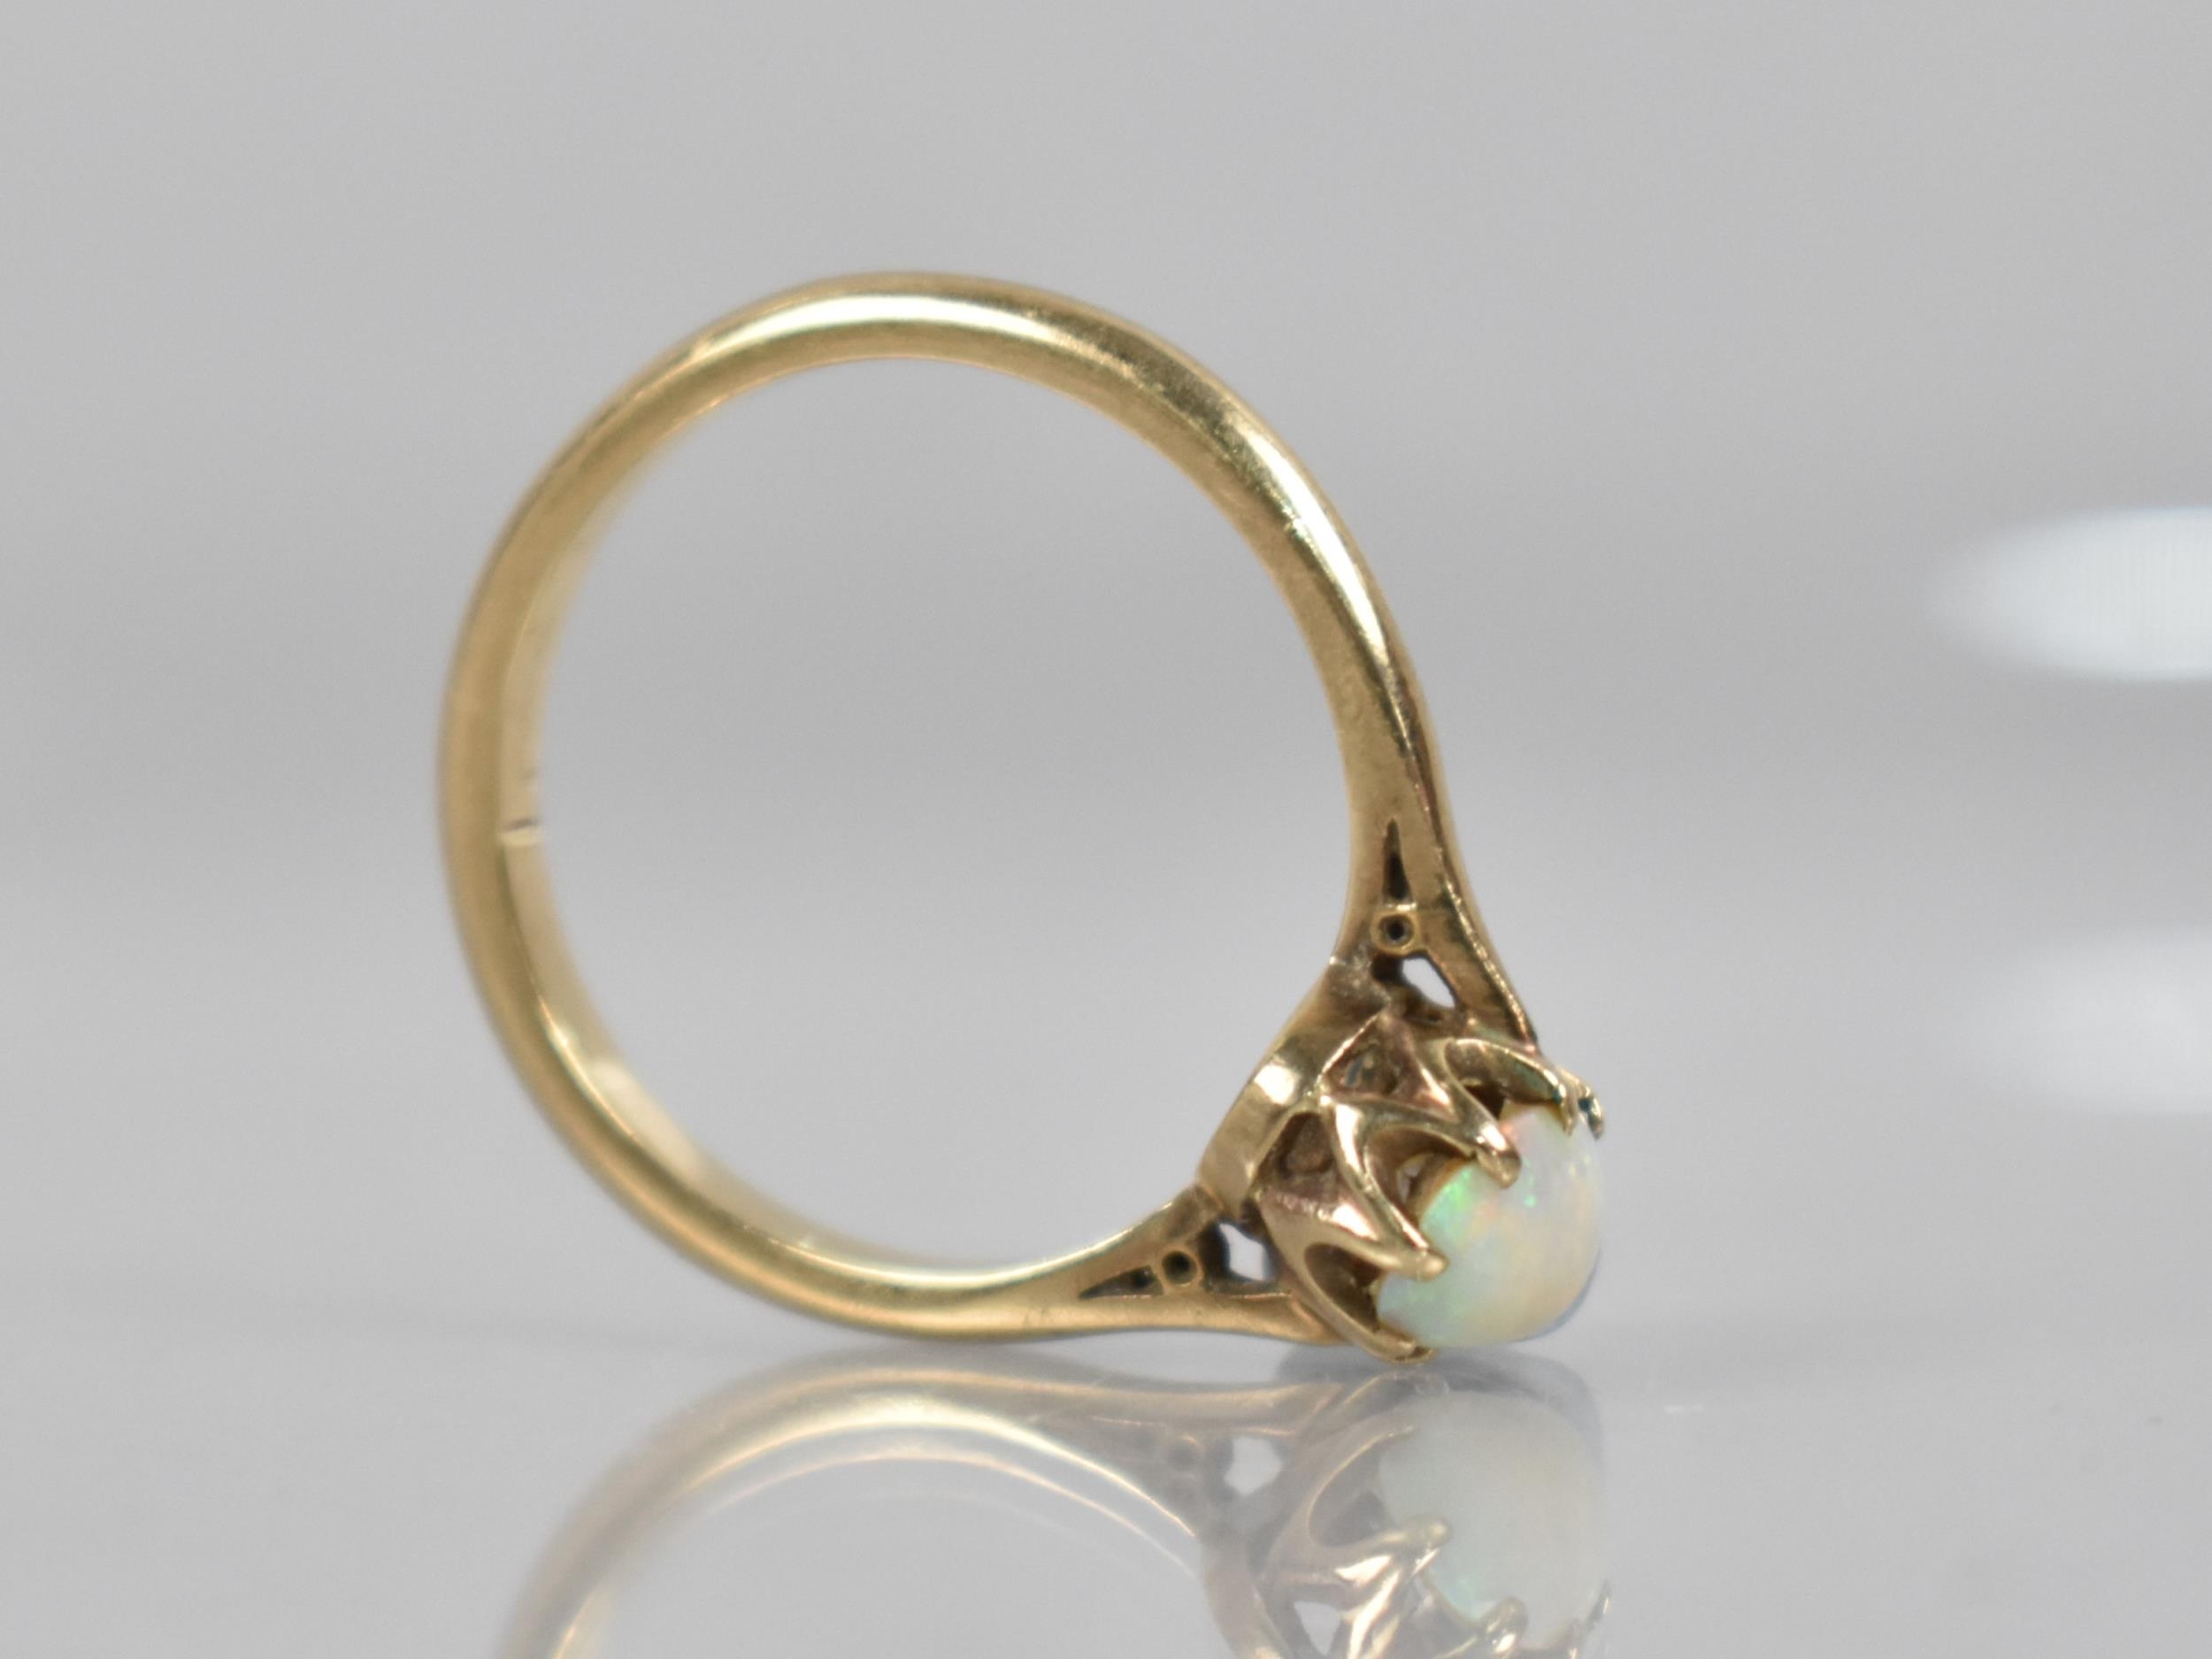 A 9ct Gold Opal Mounted Ring, Oval Cabochon Stone 7.2mm by 5.5mm, Raised in Eight Claws to Reverse - Image 2 of 4